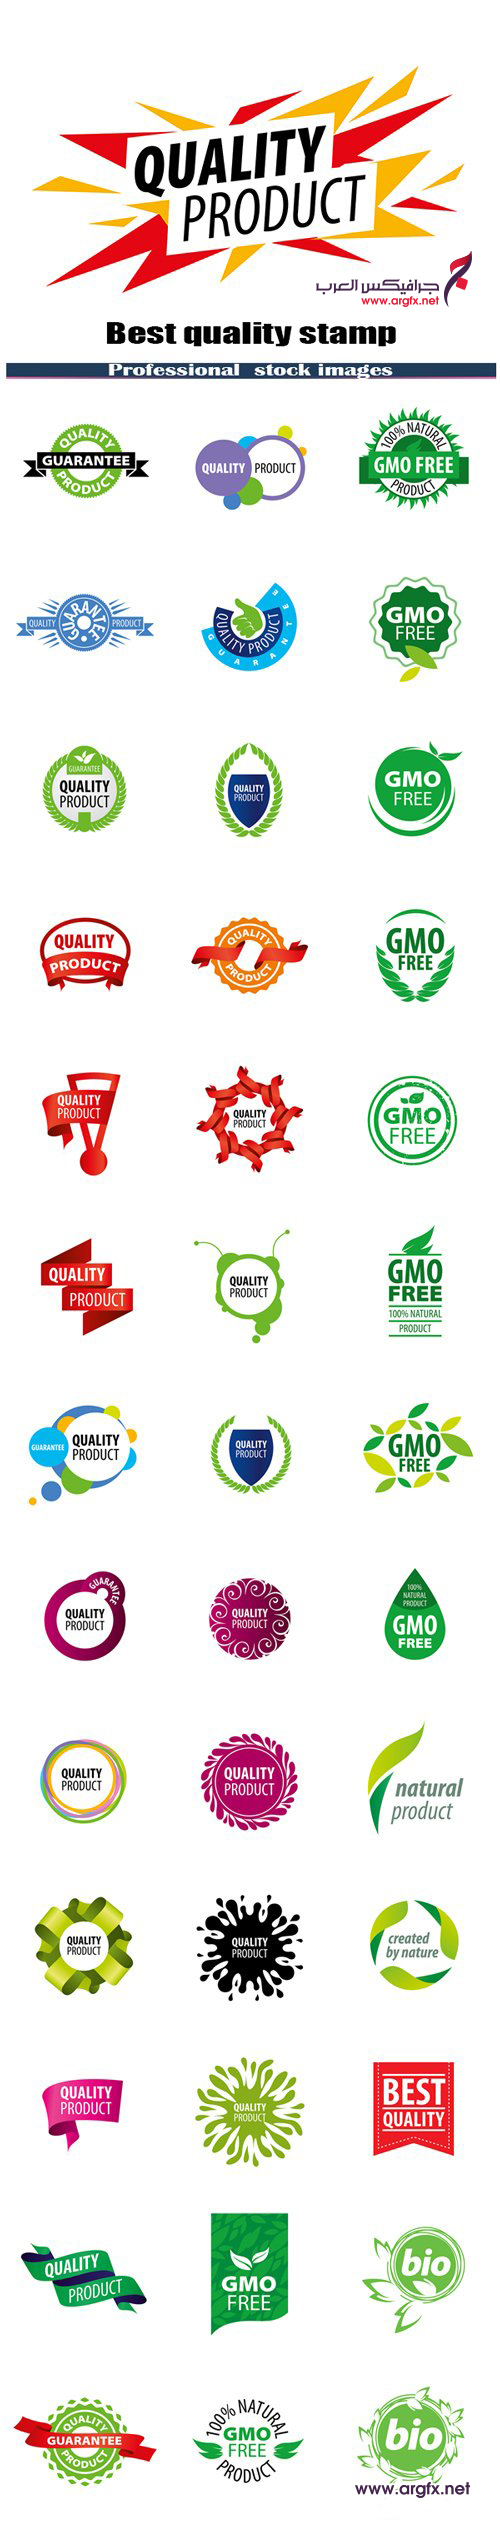  Best quality stamp and logo gmo free